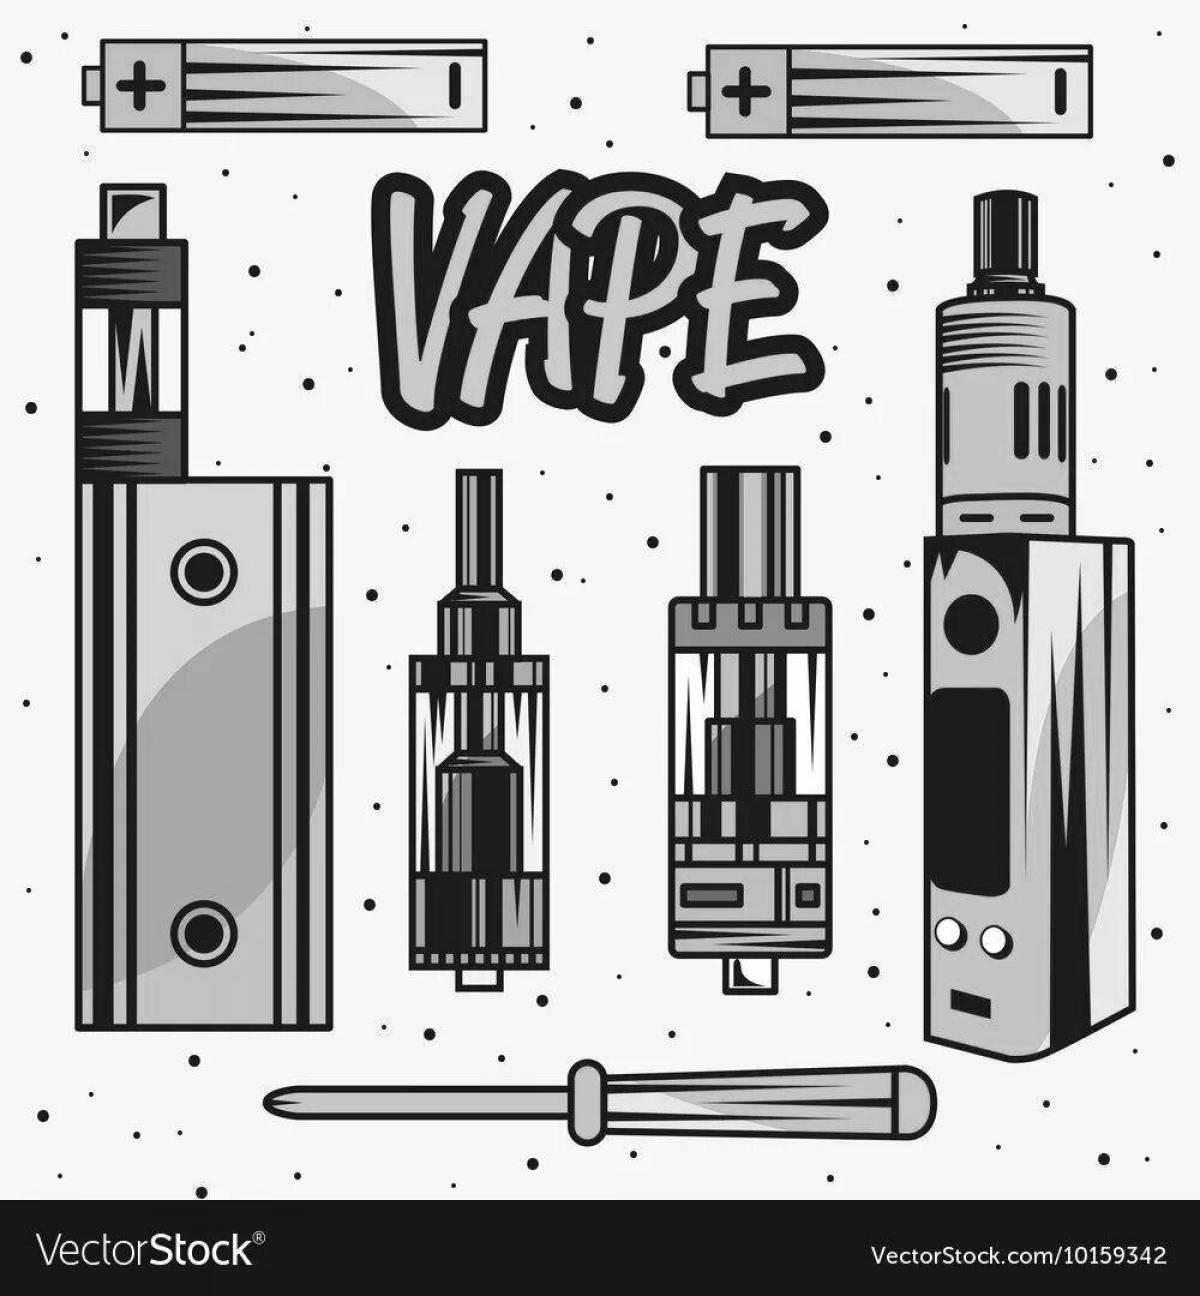 Explosive vapes coloring page